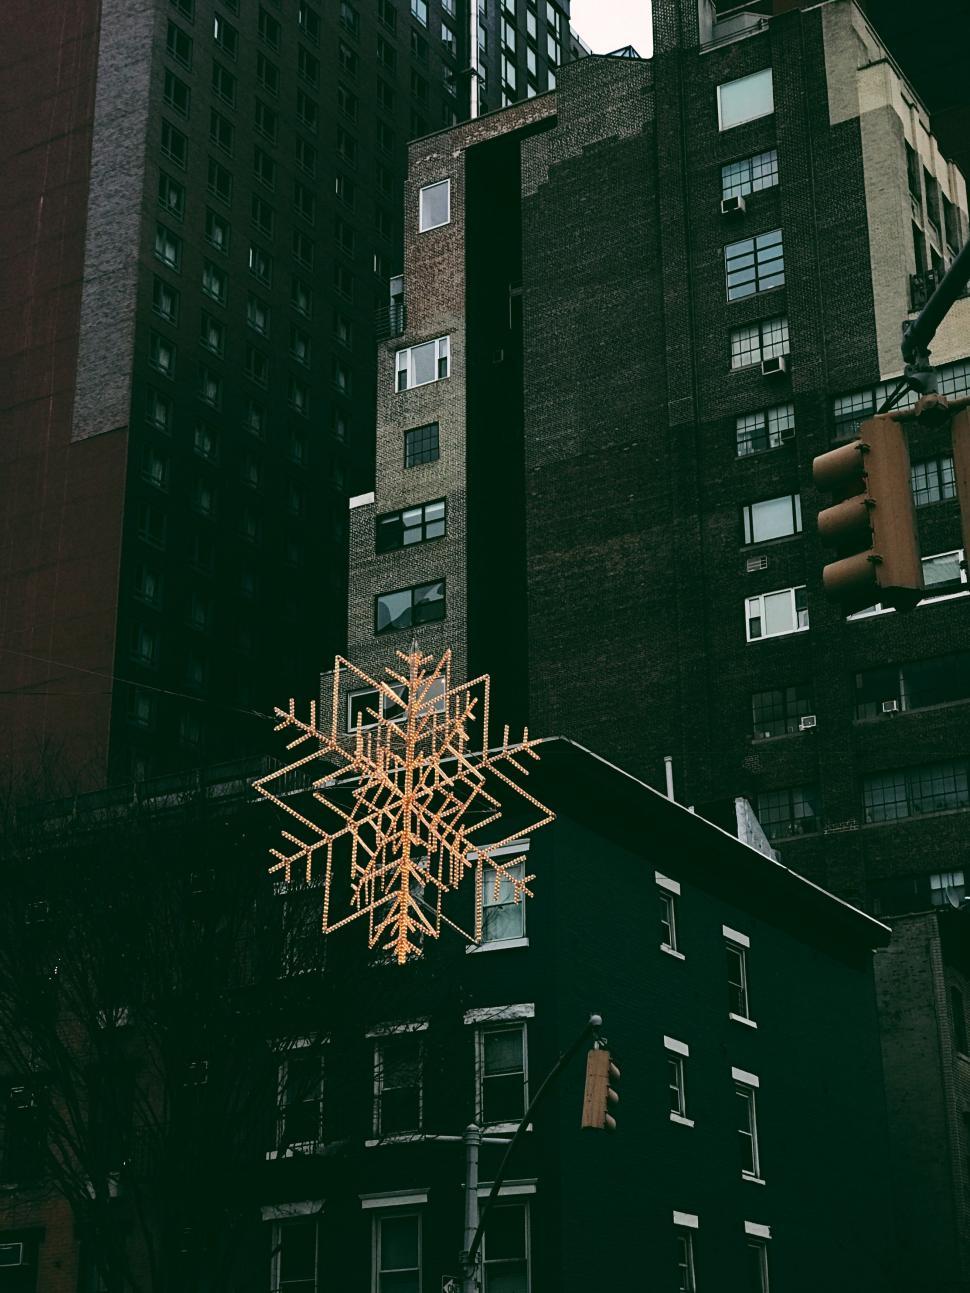 Free Image of Snowflake on Building in Urban Setting 